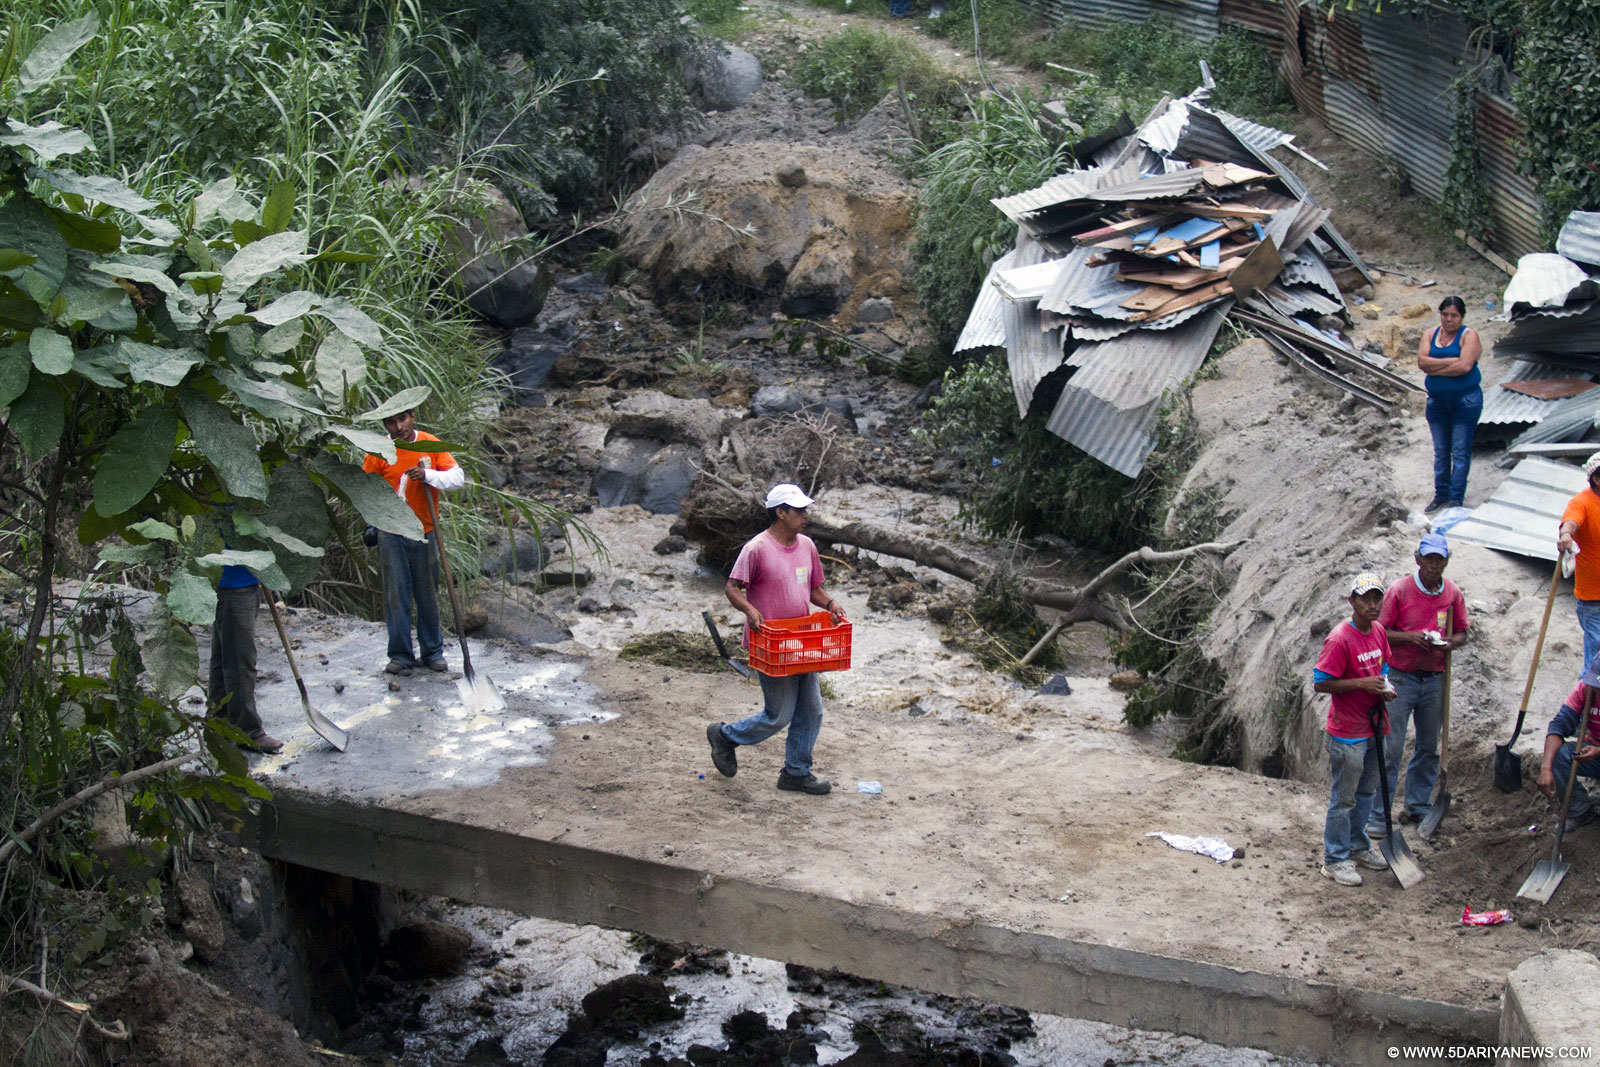 Residents collect their belongings after a landslide in Santa Catarina Pinula municipality, Guatemala department, Guatemala, on Oct. 2, 2015. At least 29 people were killed and 600 missing following a landslide that destroyed about 125 homes on the outskirts of the Guatemalan capital, officials said late Friday.